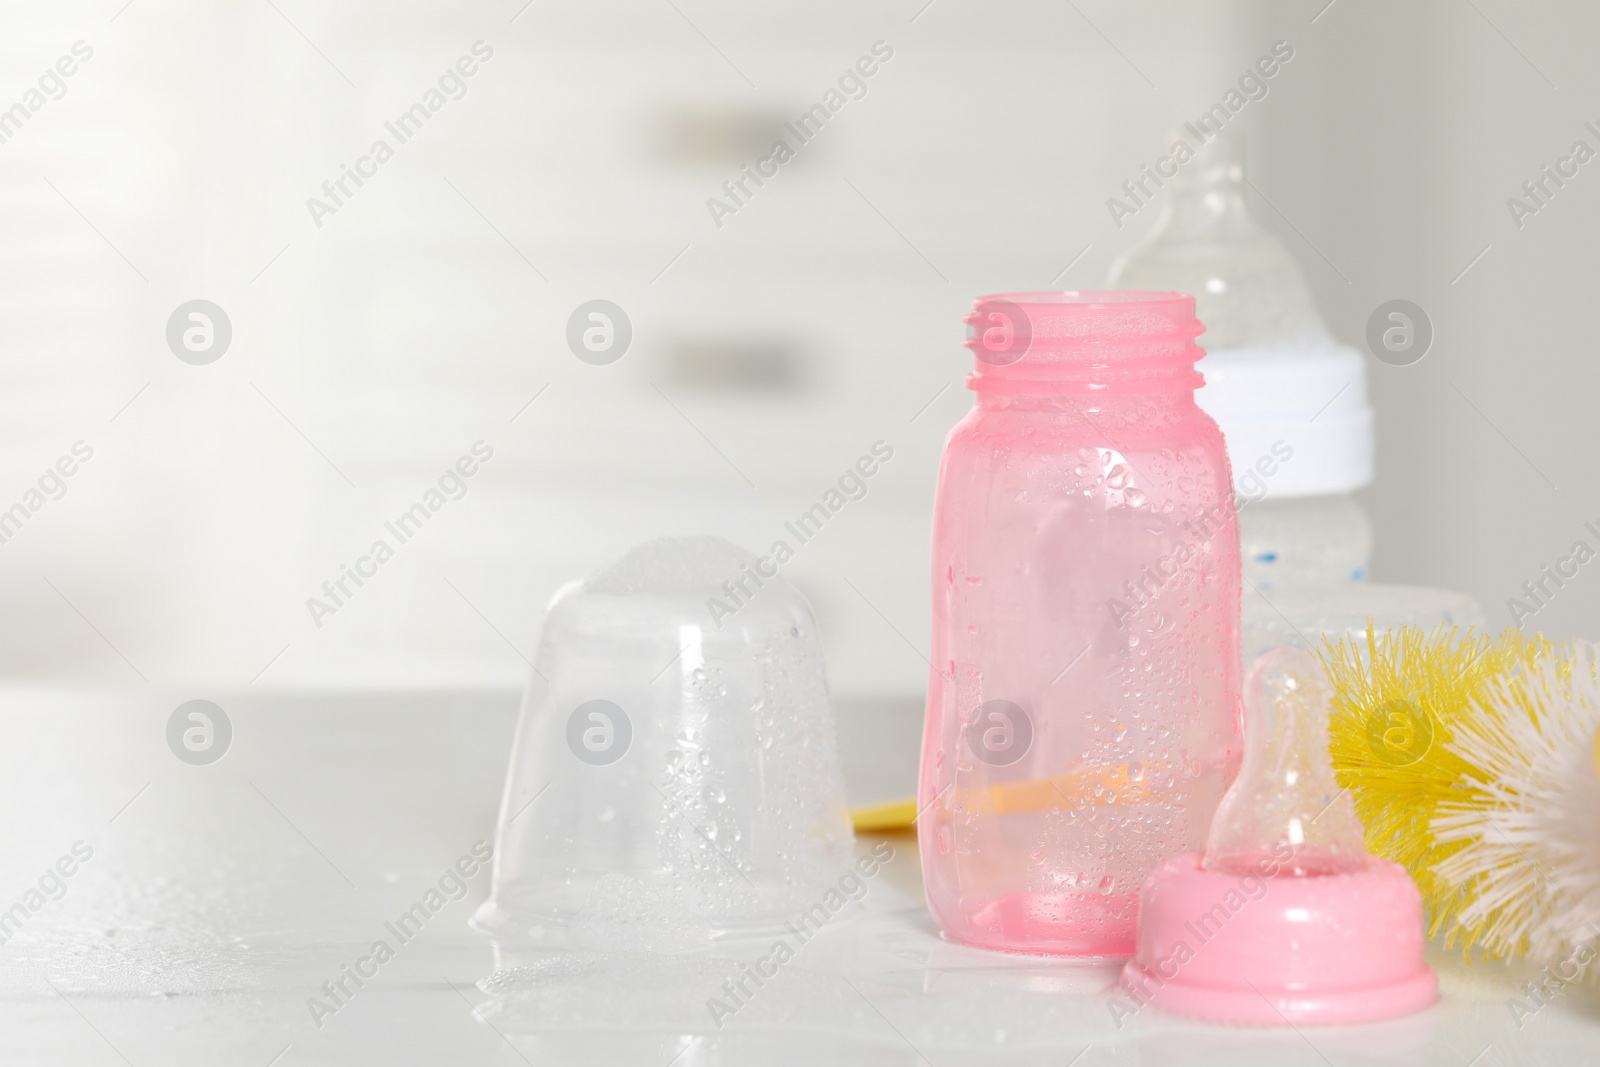 Photo of Clean baby bottles with nipples after sterilization and cleaning brush on white table indoors